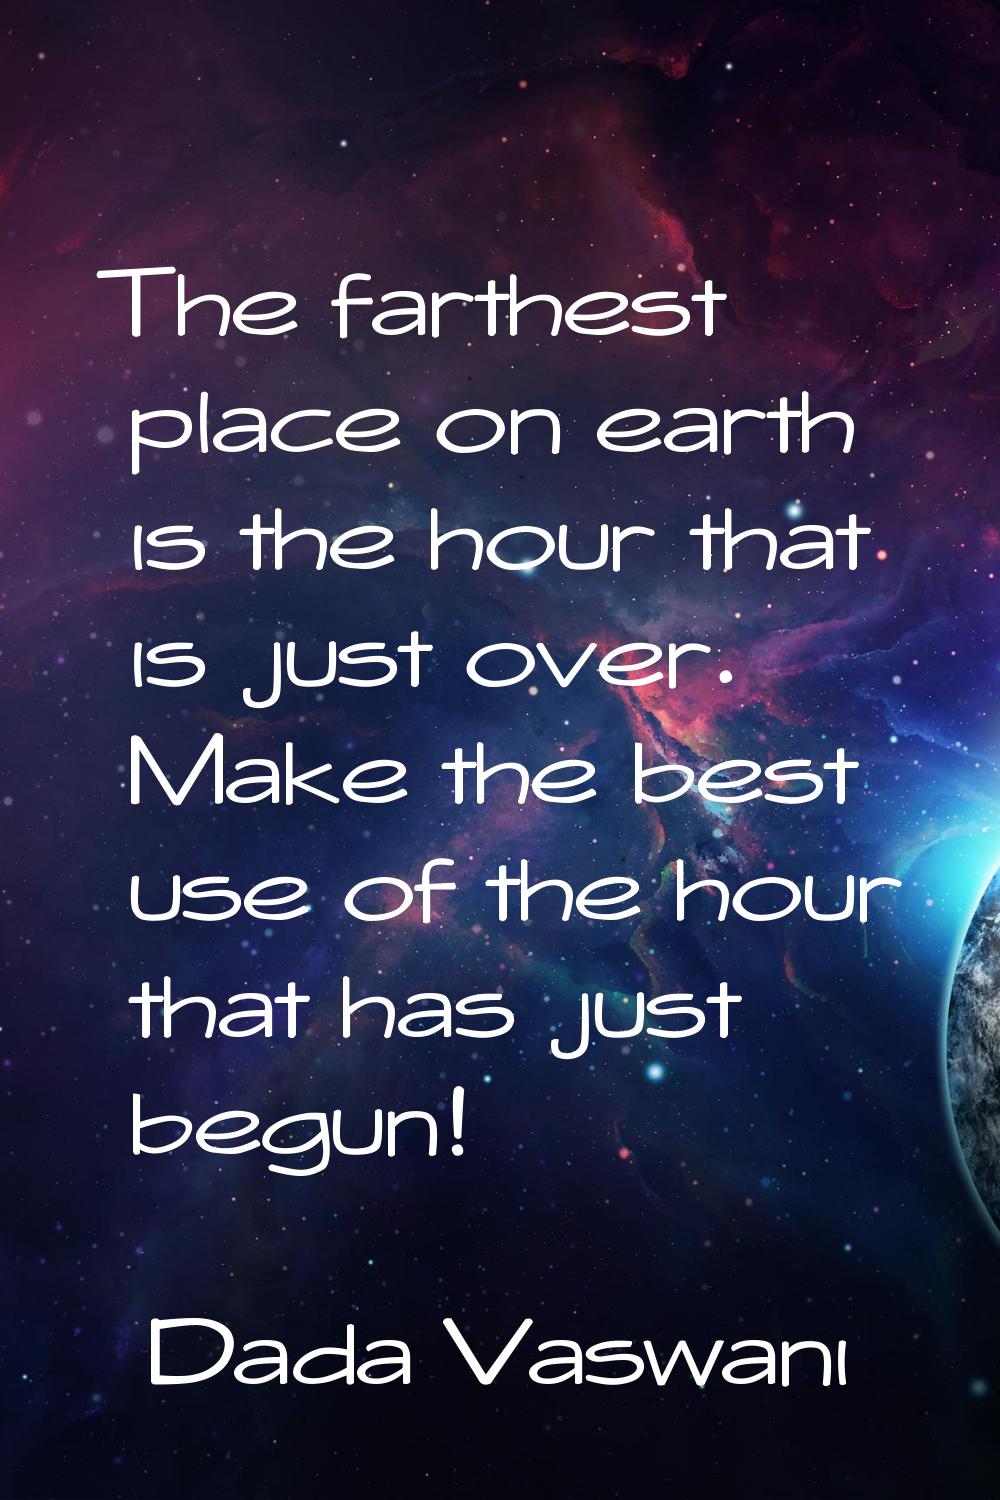 The farthest place on earth is the hour that is just over. Make the best use of the hour that has j